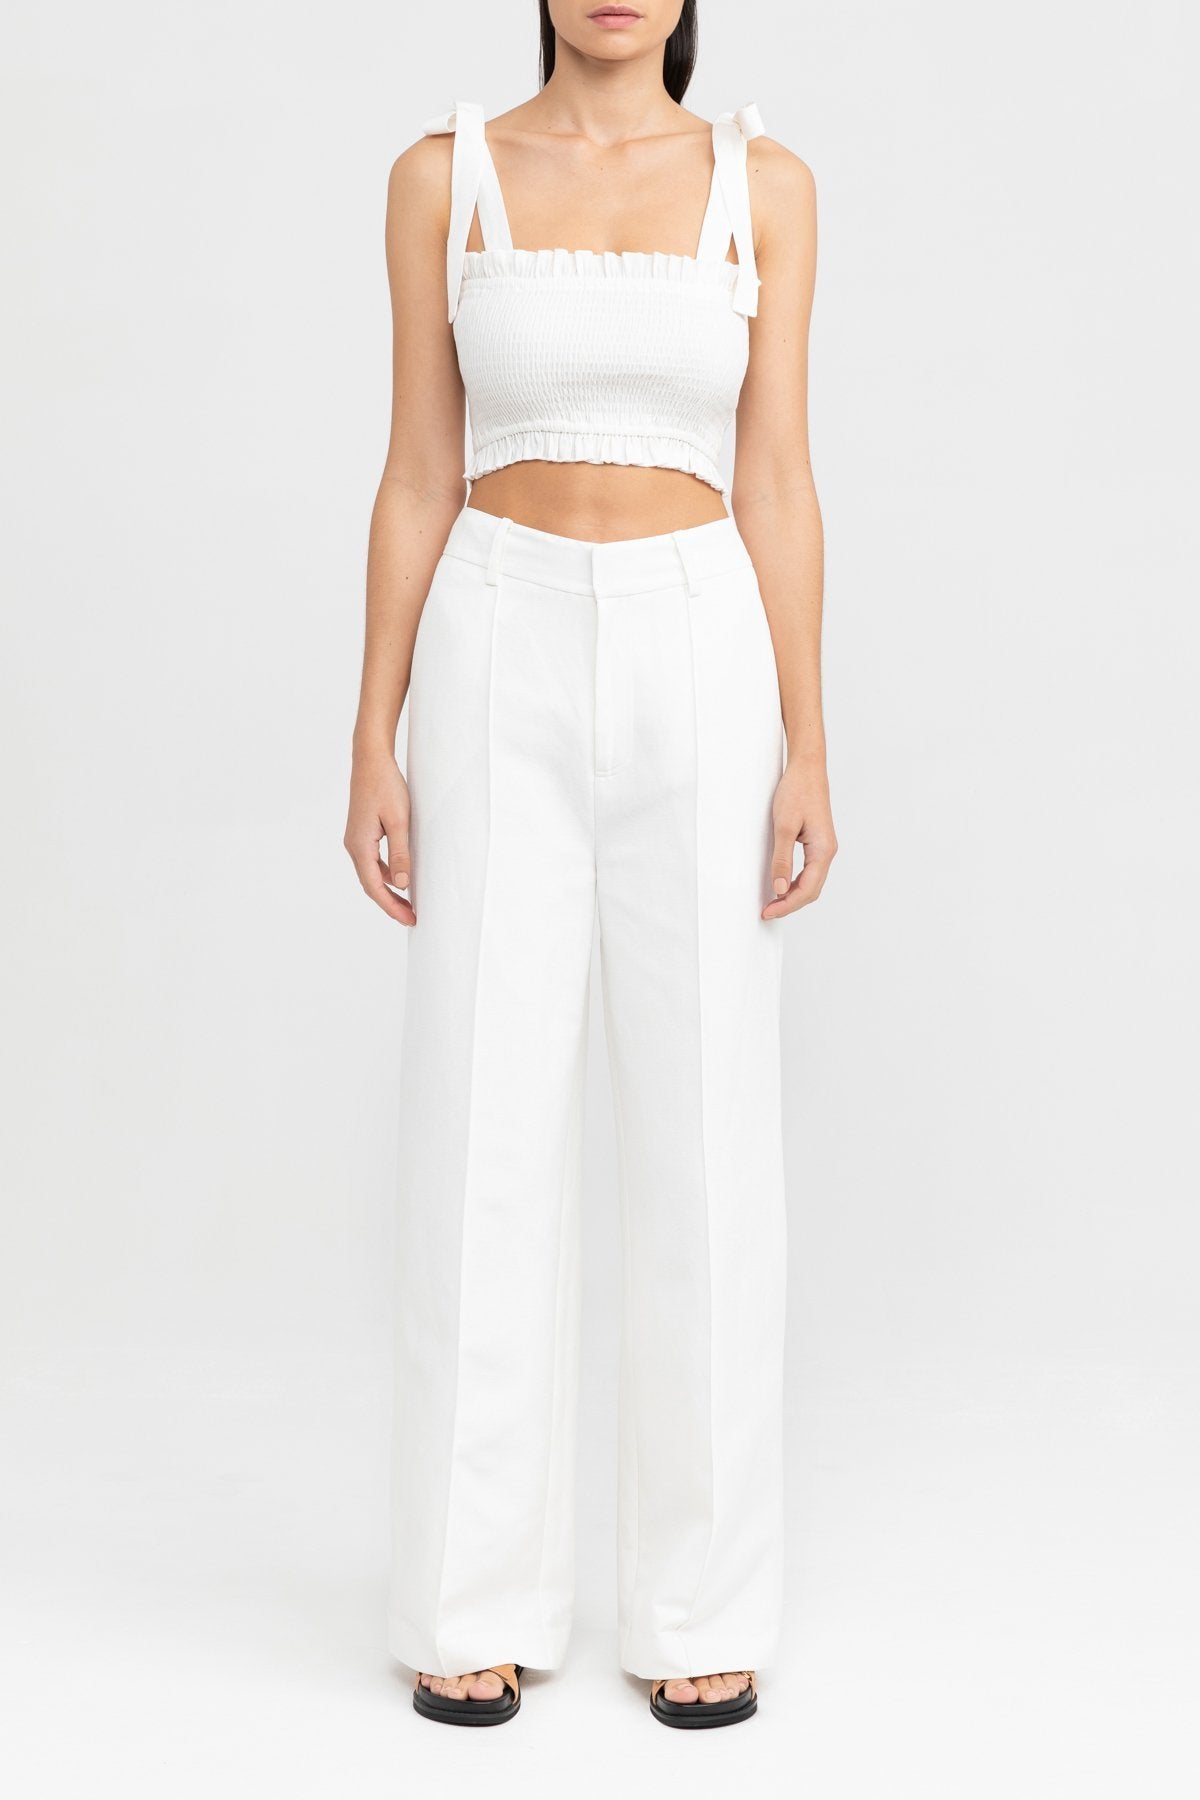 Florina Pant in Ivory